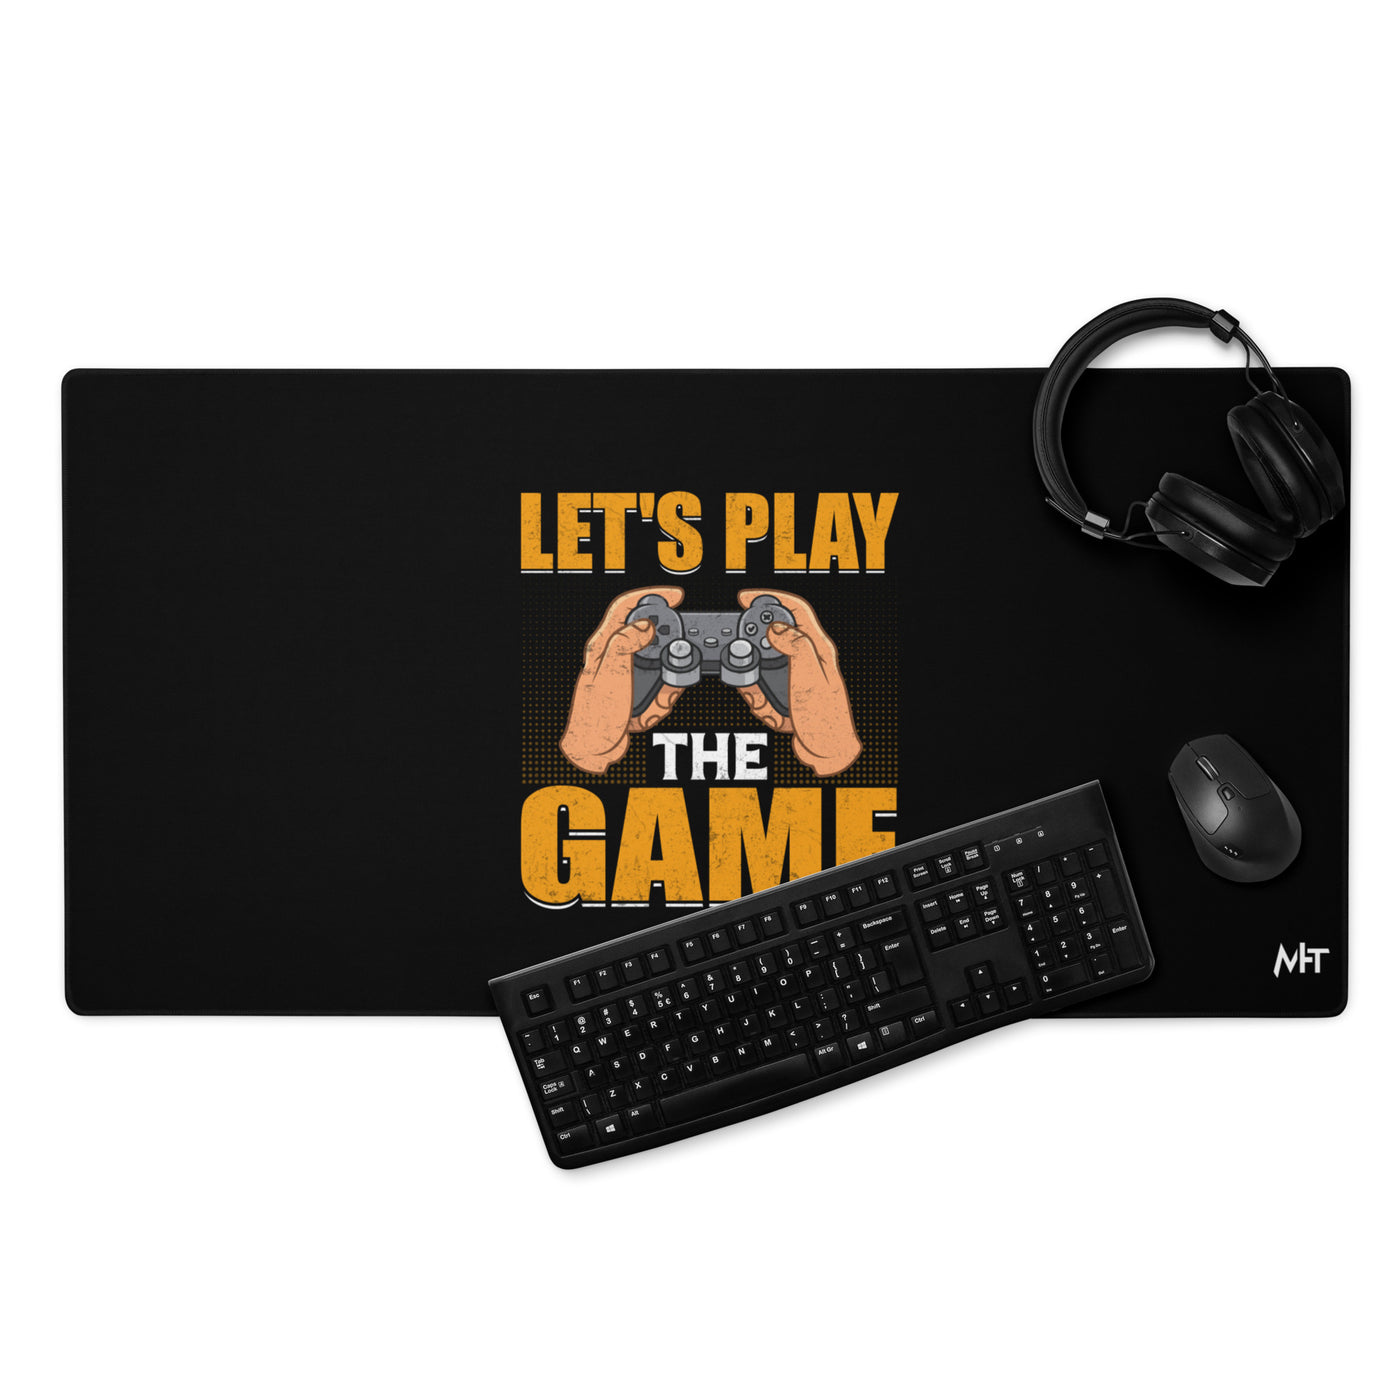 Let's Play the Game - Desk Mat